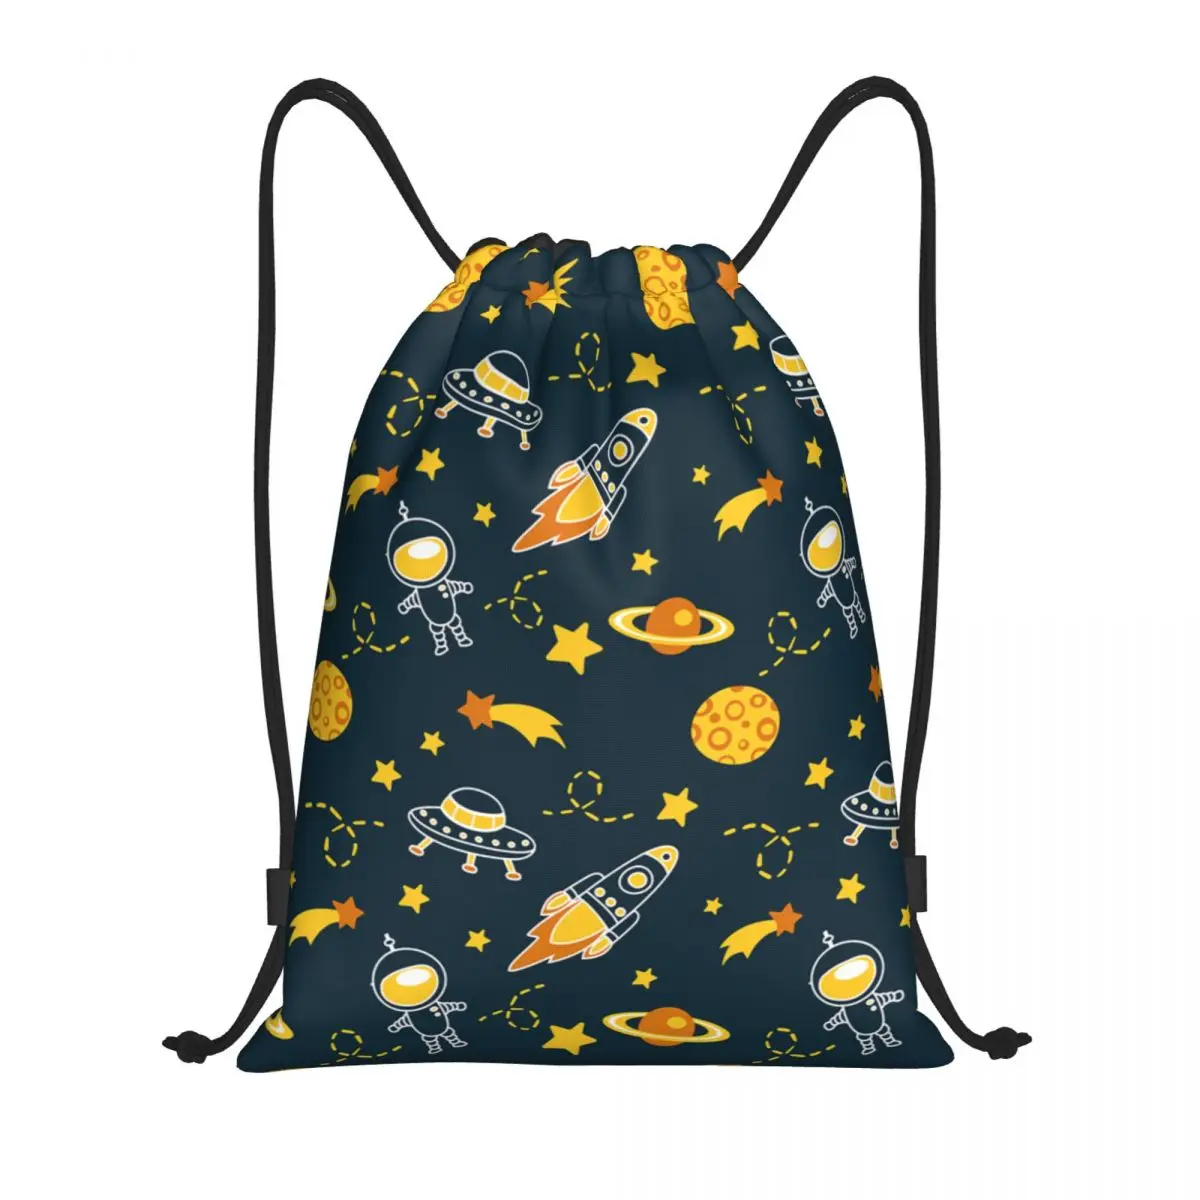 

Space Rocket Galaxy Planet Drawstring Backpack Bags Lightweight Universe Astronaut Spaceship Gym Sackpack Sacks for Traveling